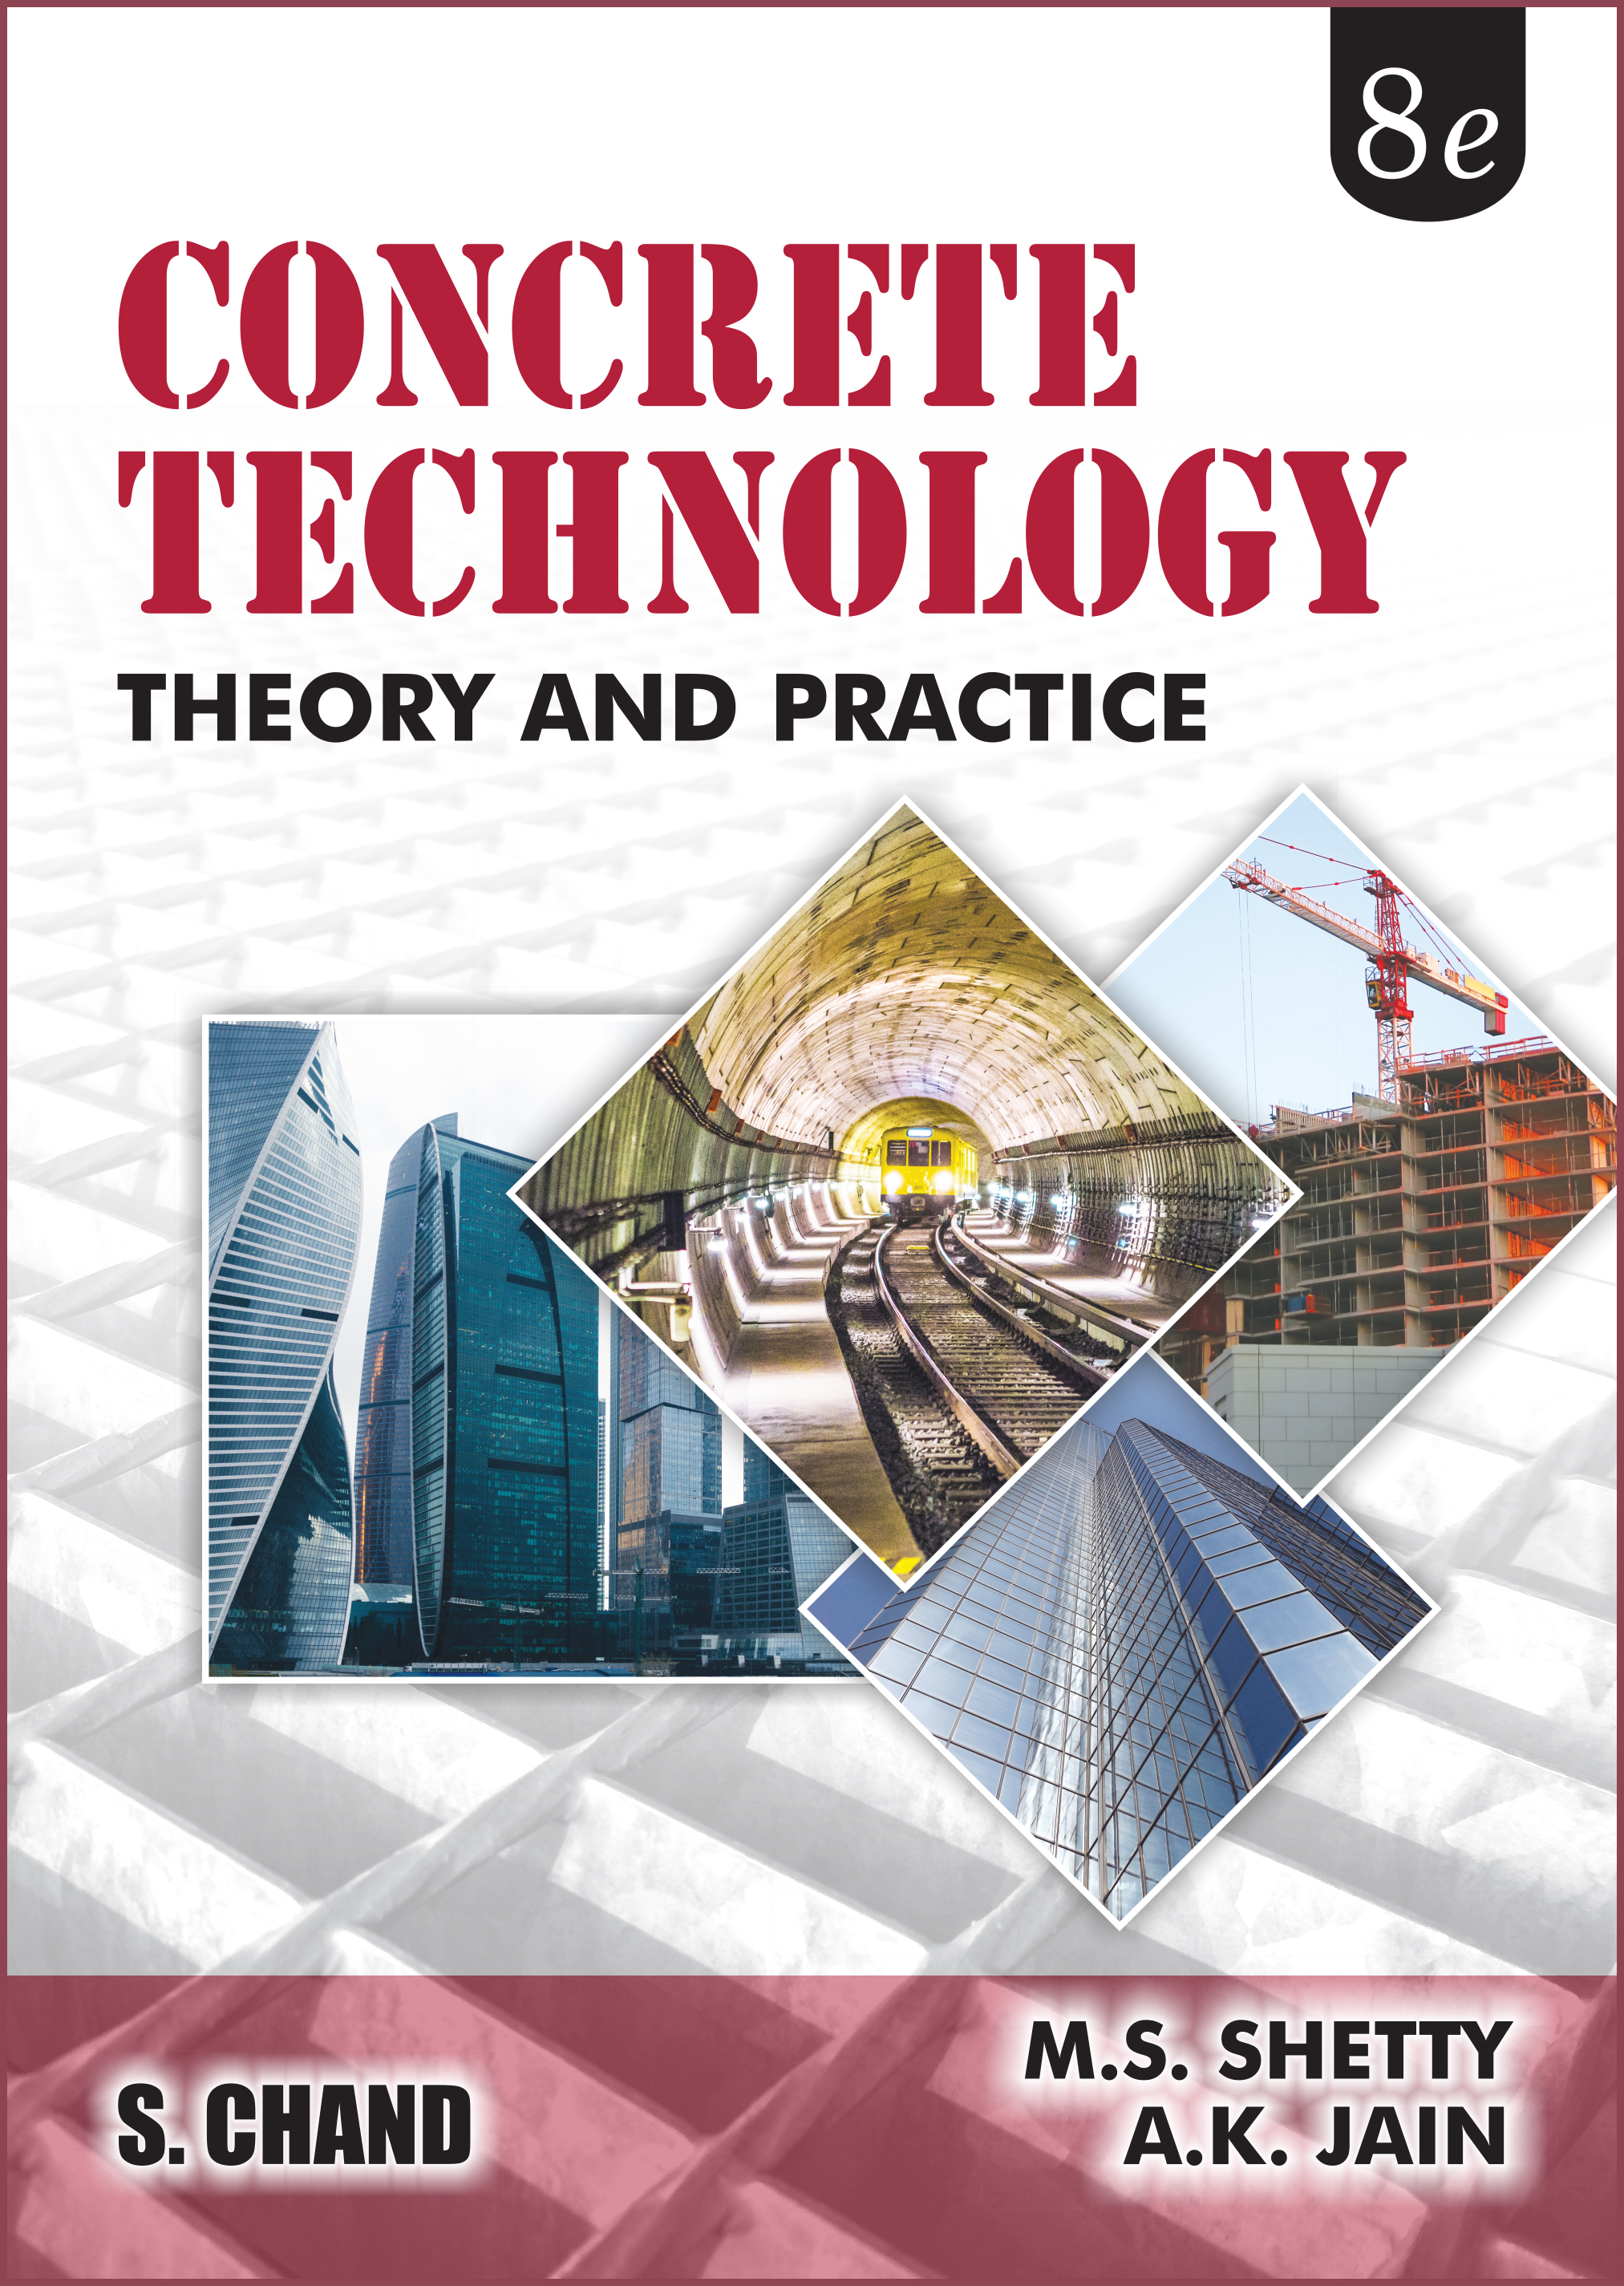 Concrete Technology: Theory and Practice by M S Shetty & A K Jain